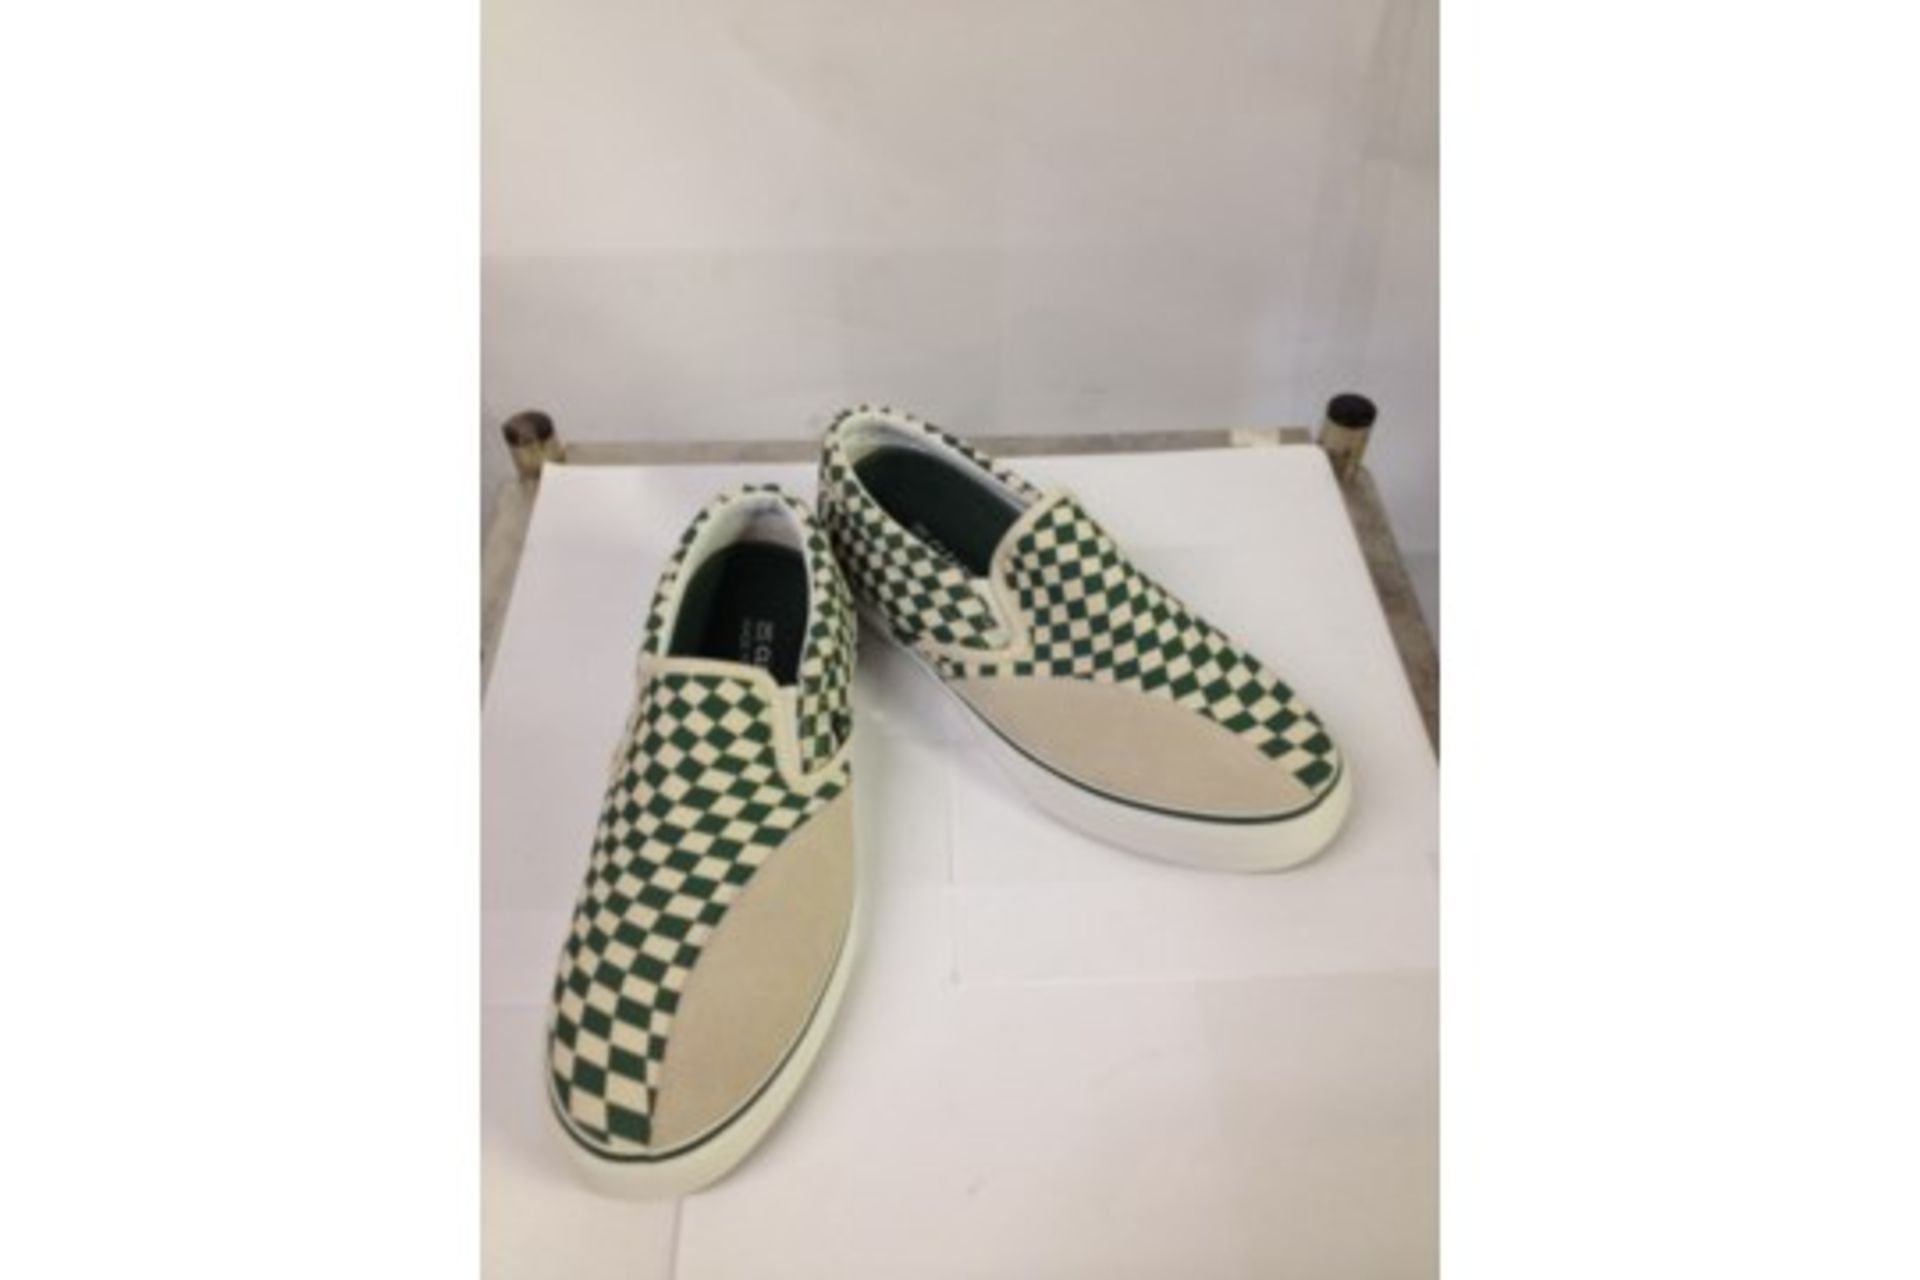 1 x Dodds Skate Shoe | Colour: Green Check Trip | UK Size: 7 | Unisex | RRP £ 55 - Image 2 of 2